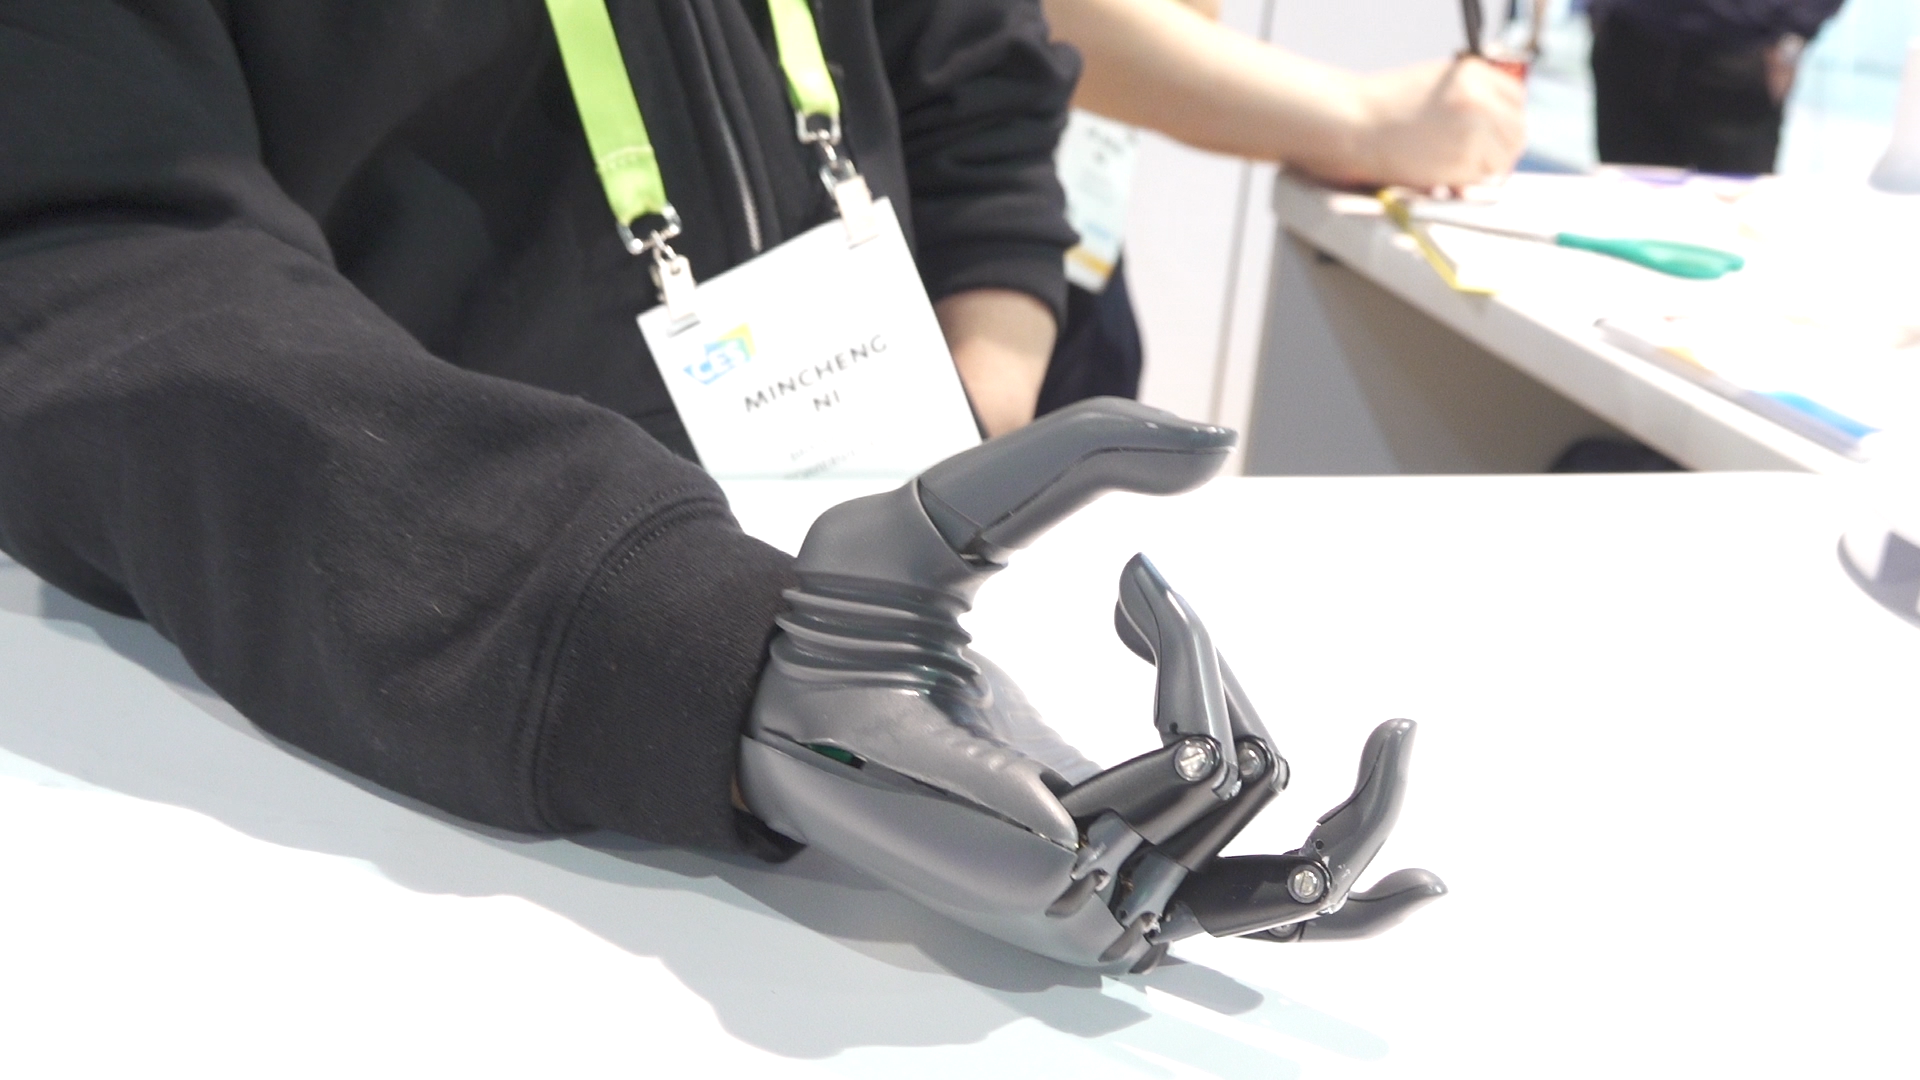 The Brain Robotics prosthetic hand featured at CES 2019.